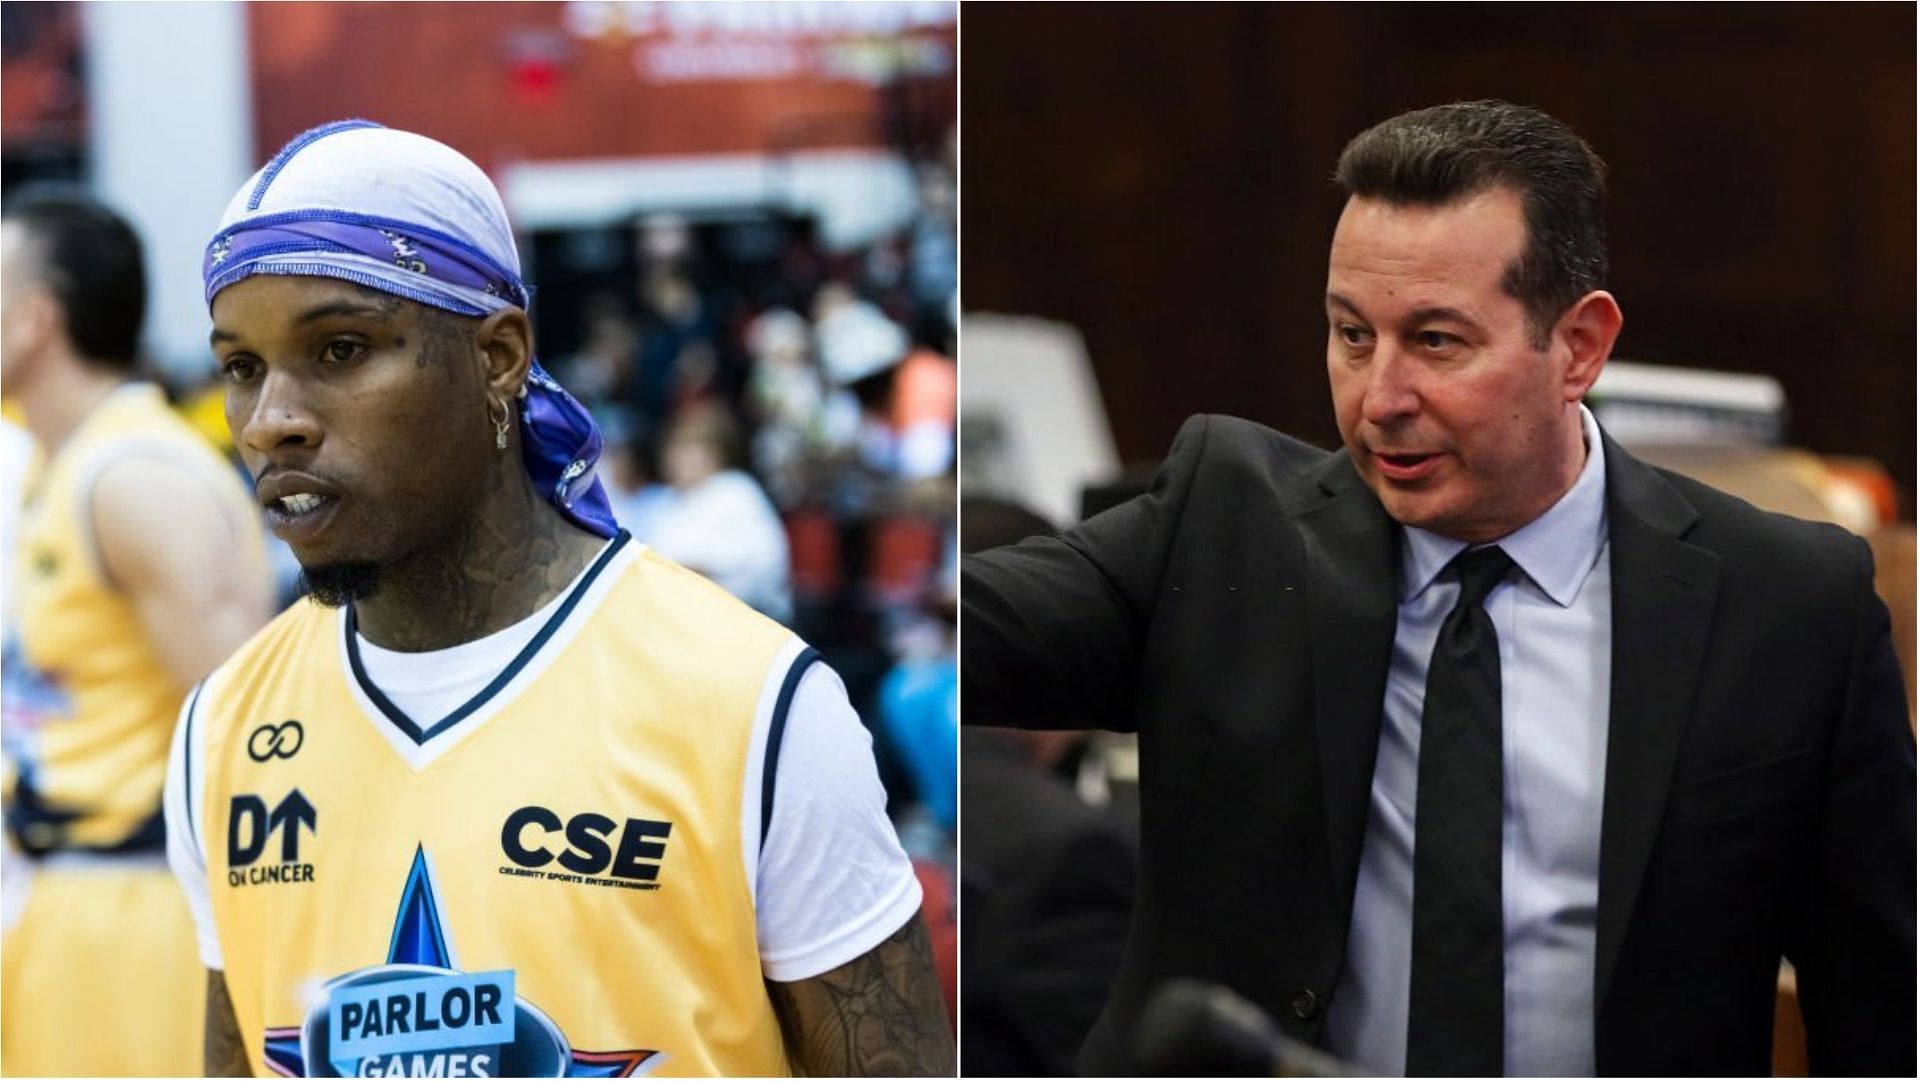 Tory Lanez has hired Jose Baez as his new attorney (Images via Greg Doherty and Nancy Lane/Getty Images)